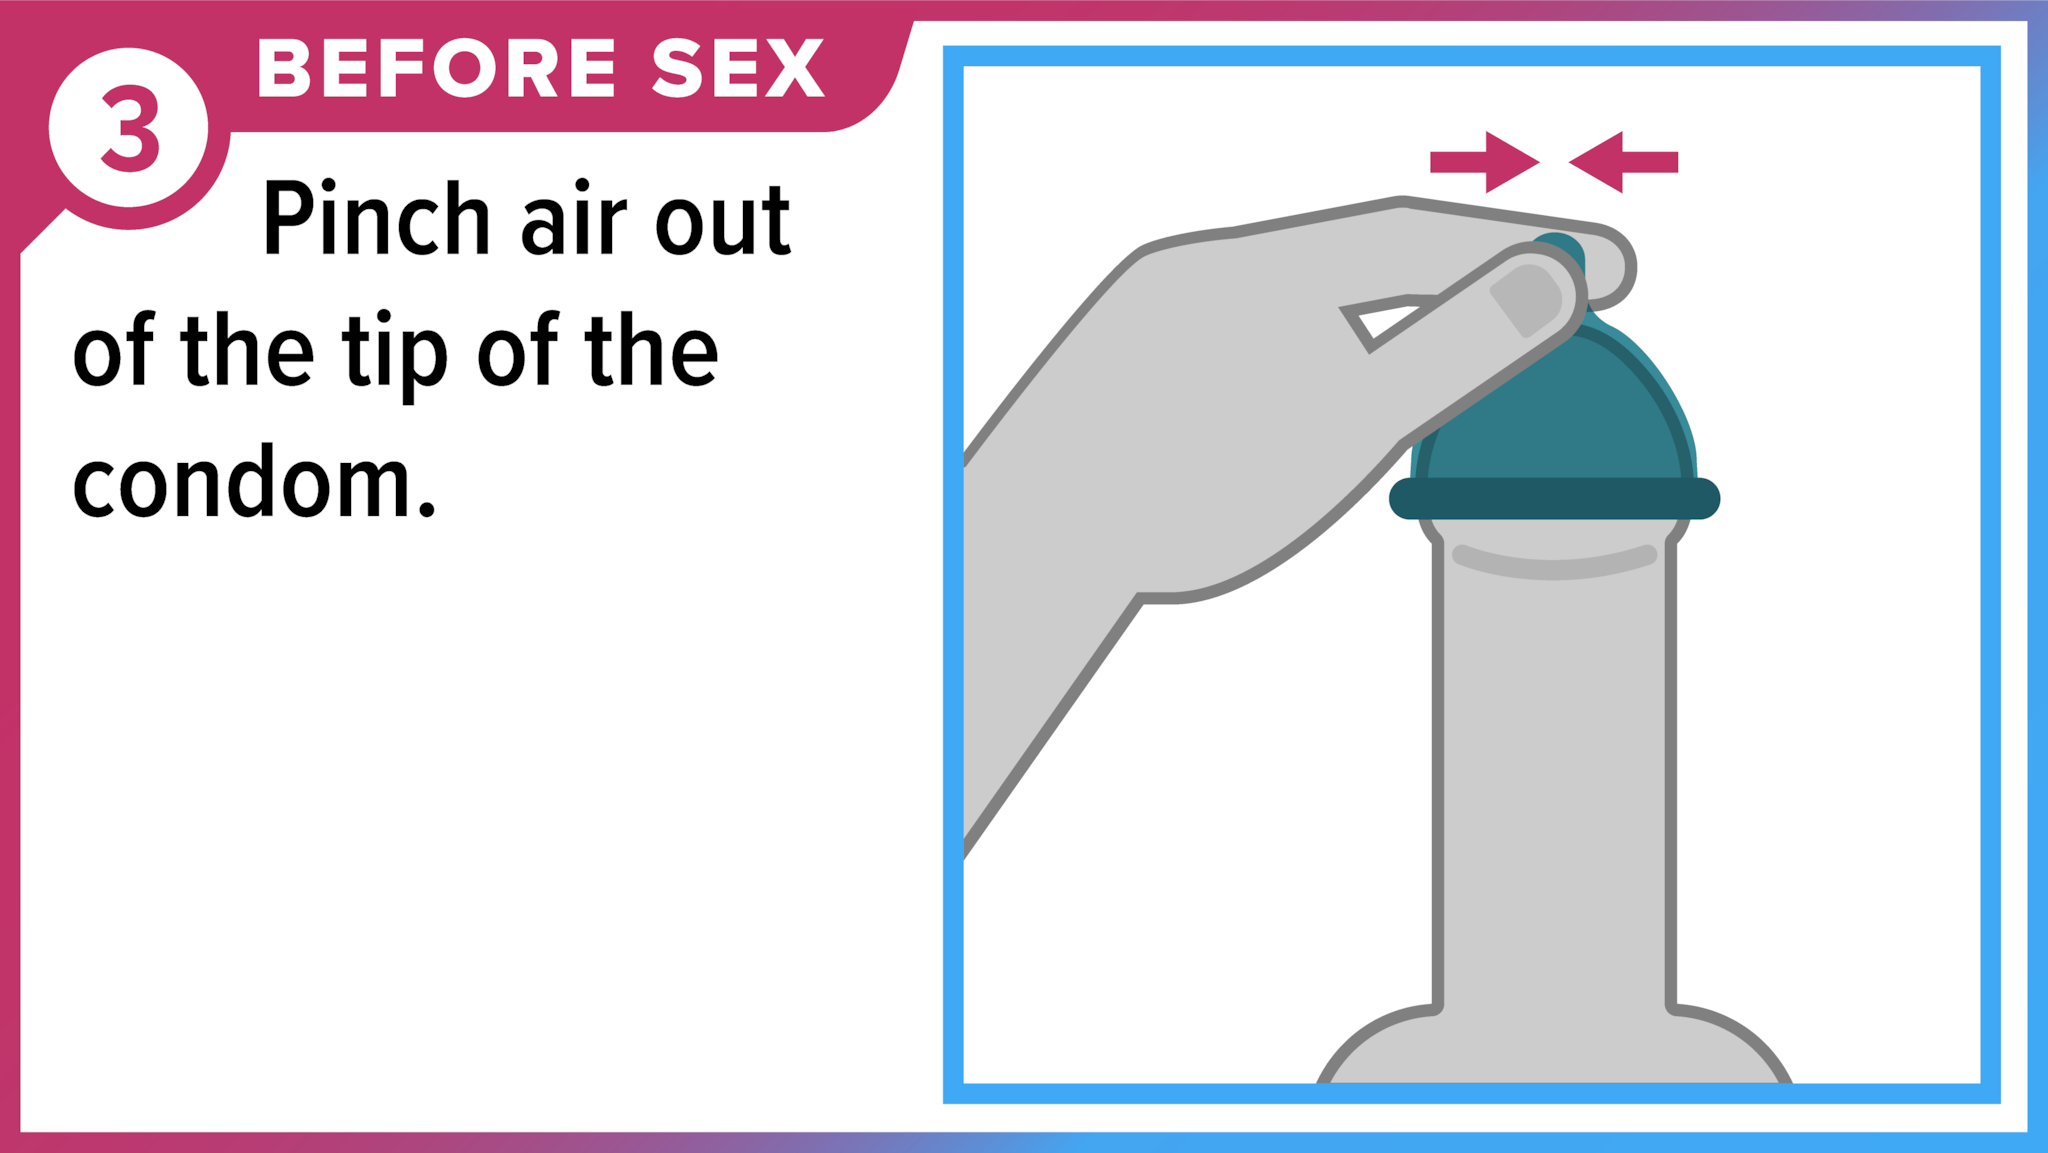 Hand pinching air out of the tip of the condom. Before sex, pinch air out of the tip of the condom.